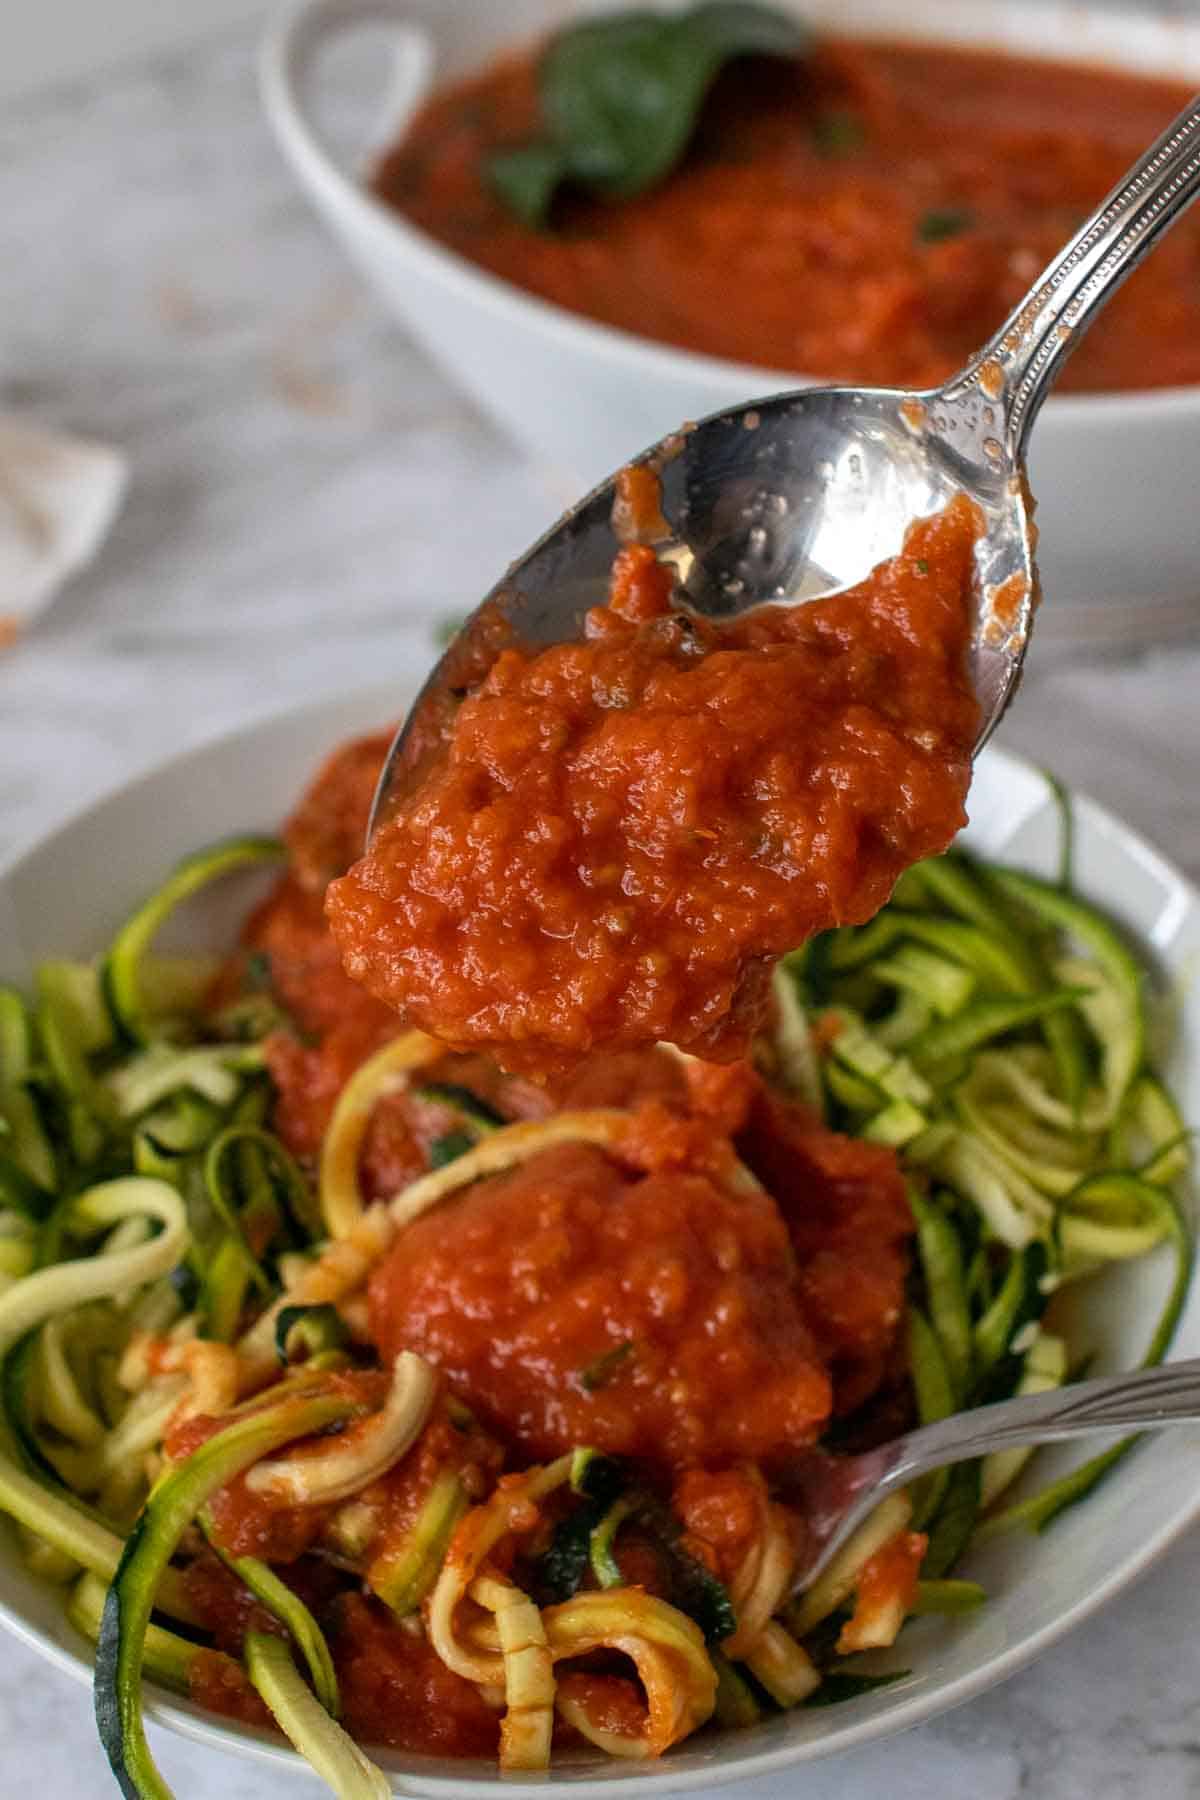 Spoonful of tomato sauce being put on vegetable noodles